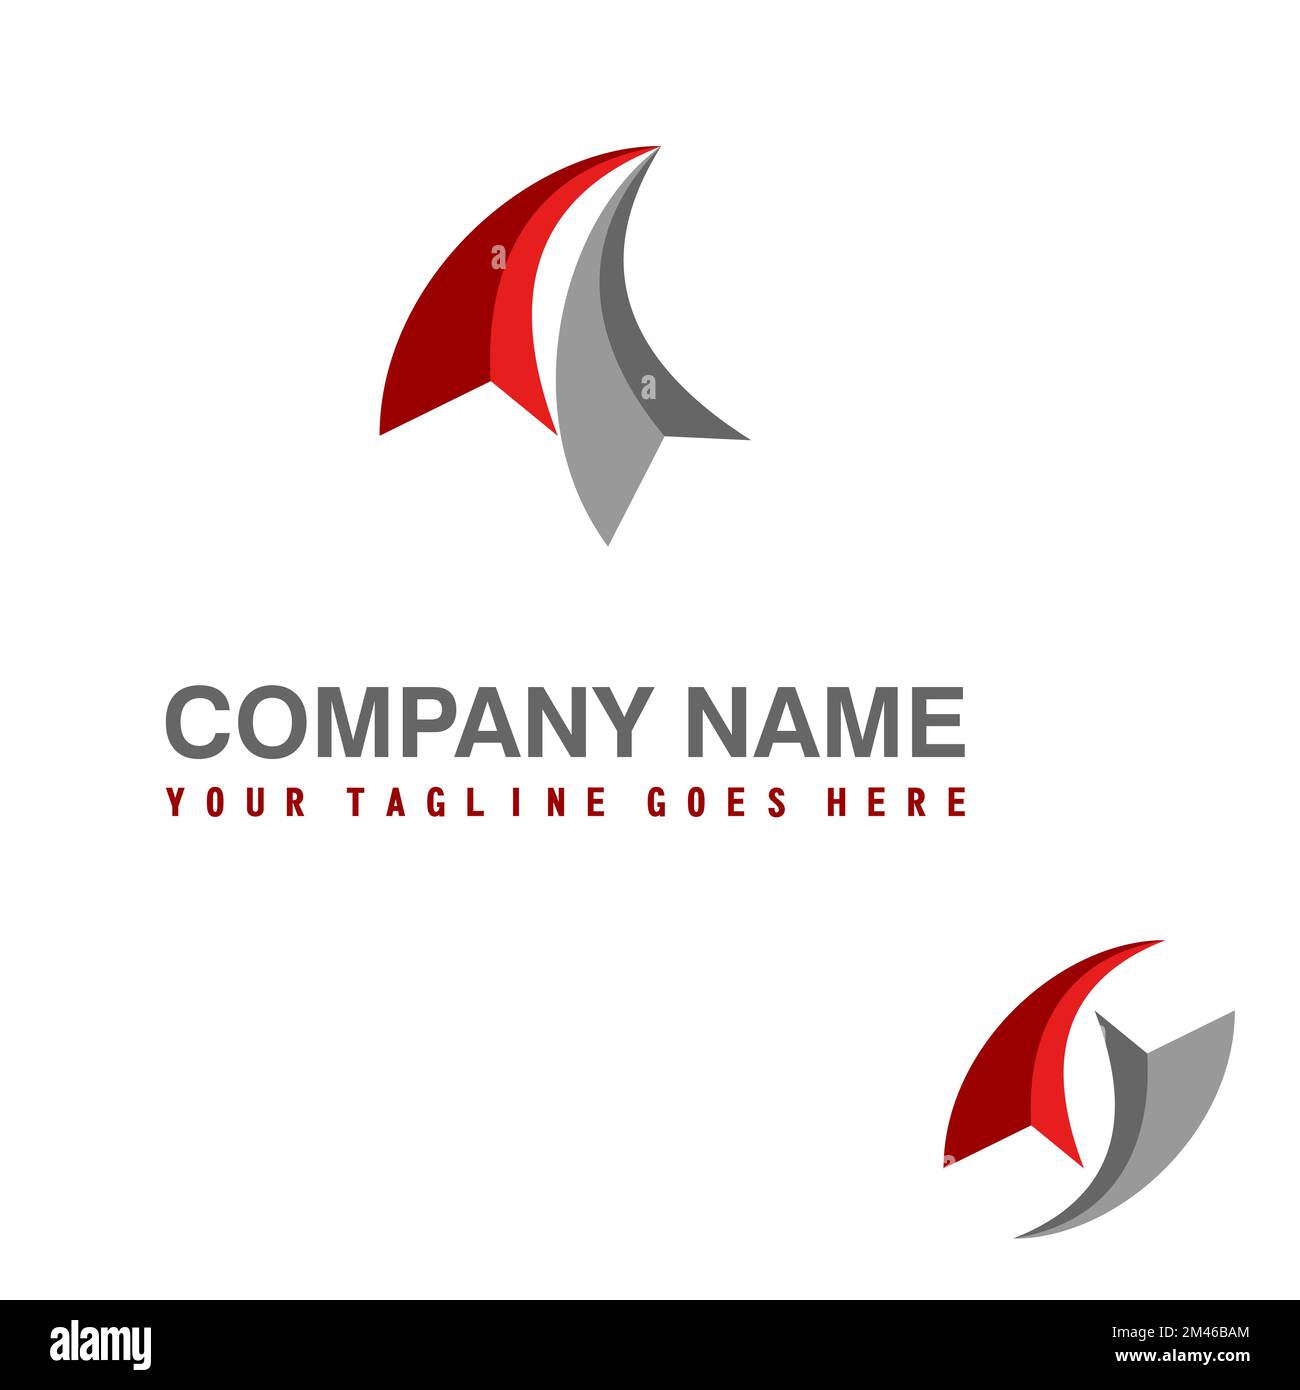 Curved arrow in gray and red colors image graphic icon logo design abstract concept vector stock.  used as a symbol related to business or increase Stock Vector